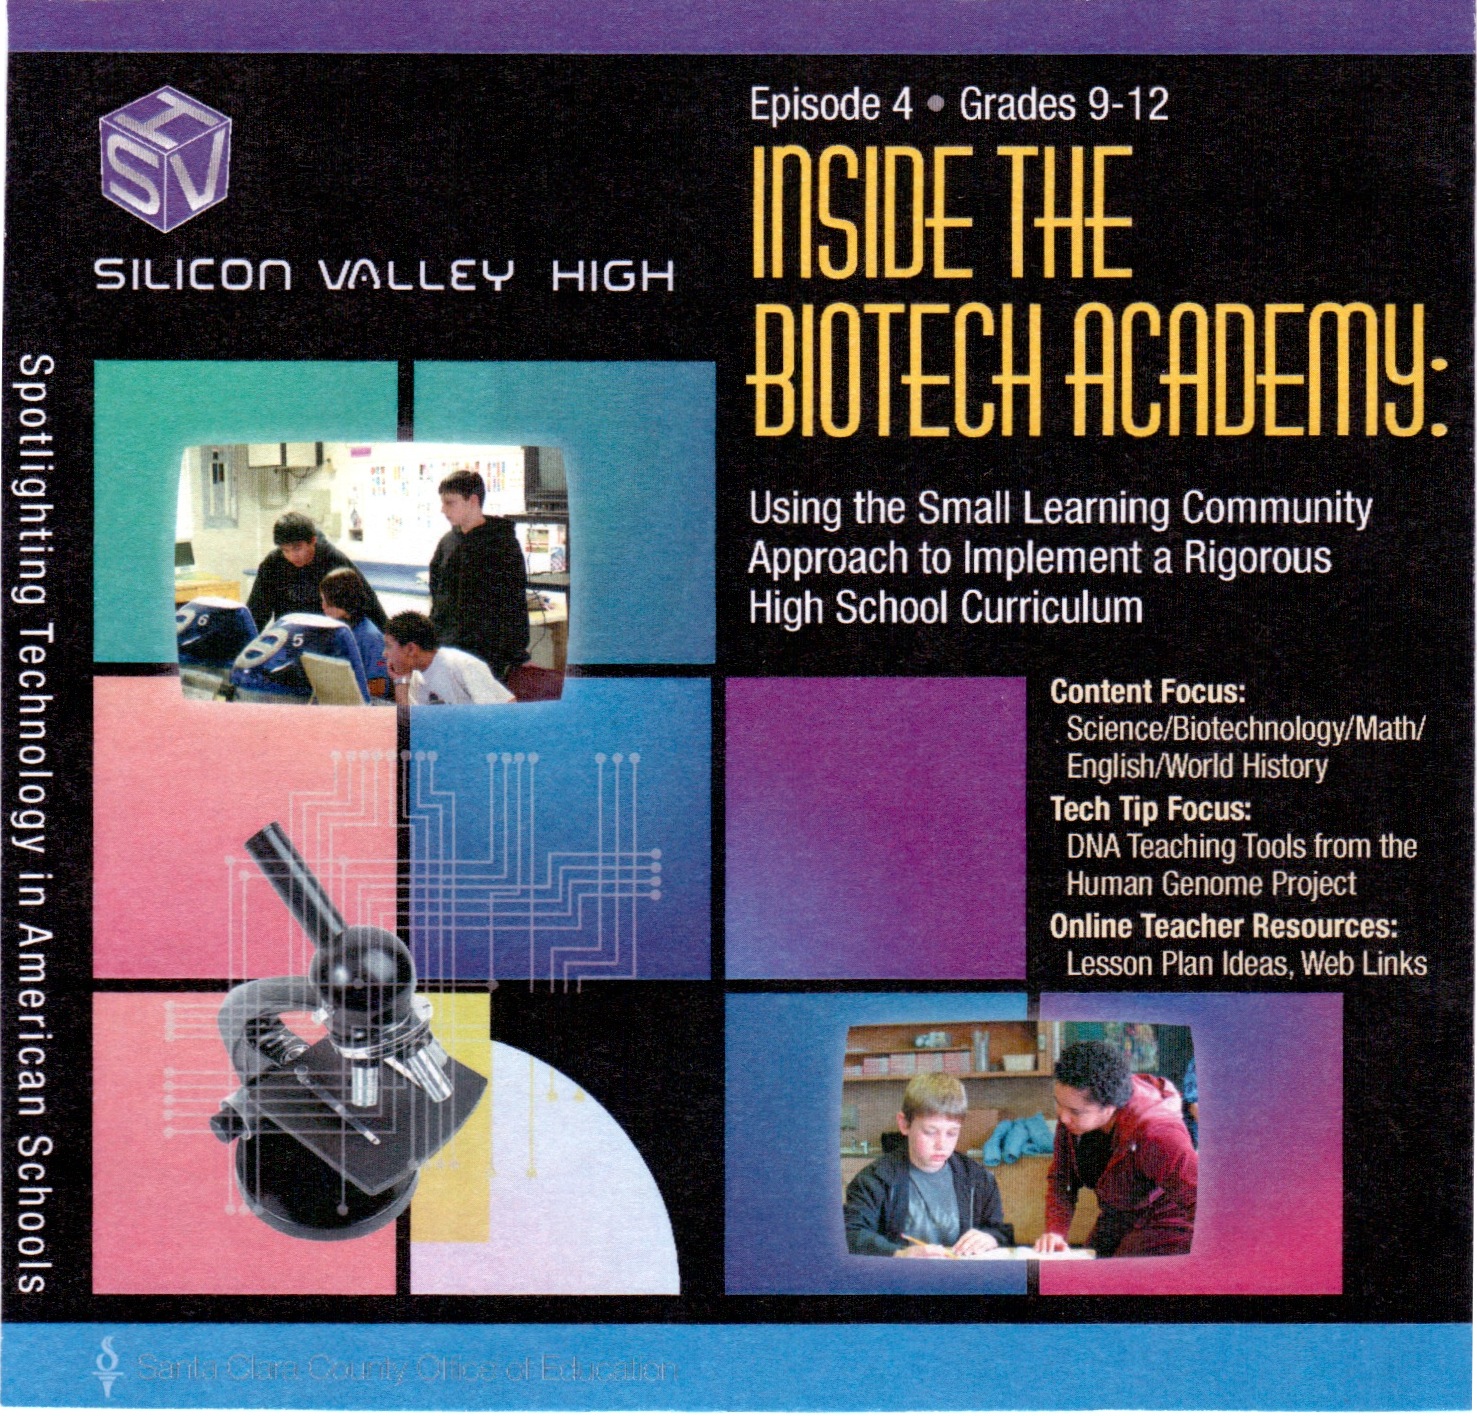 DVD cover for Silicon Valley High, Episode 4, Inside the Biotech Academy